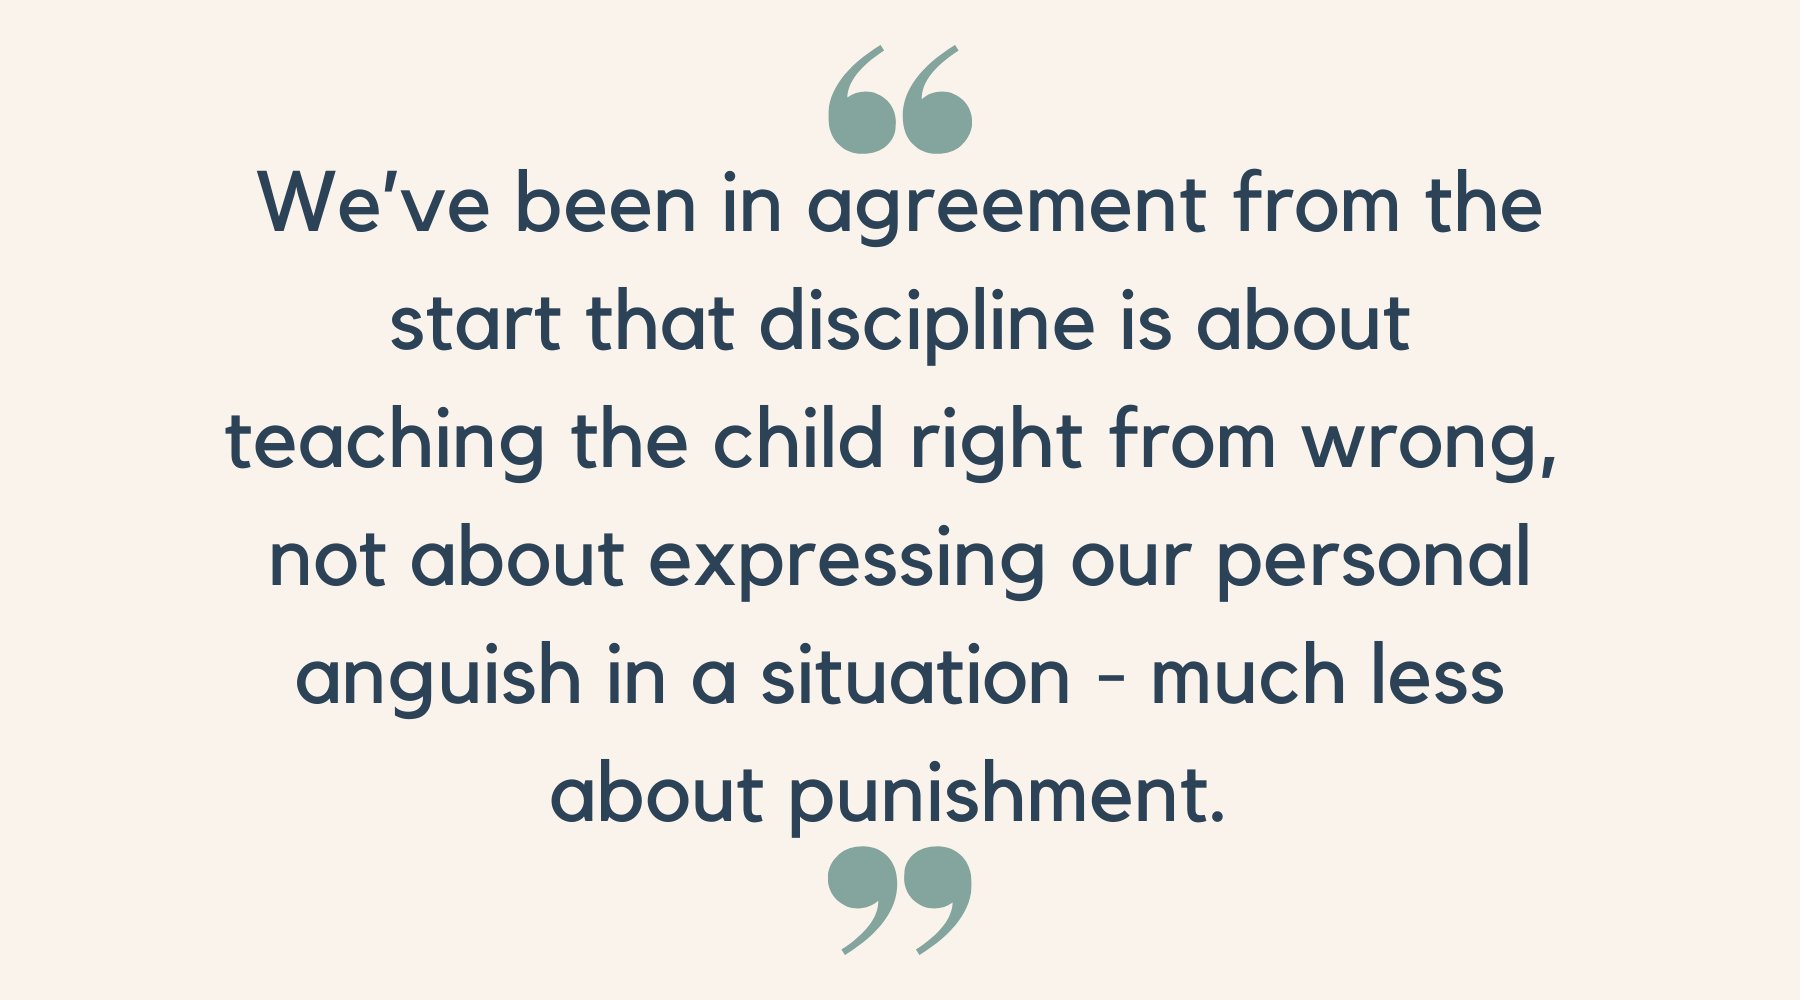 We’ve been in agreement from the start that discipline is about teaching the child right from wrong,  not about expressing our personal anguish in a situation - much less about punishment. 